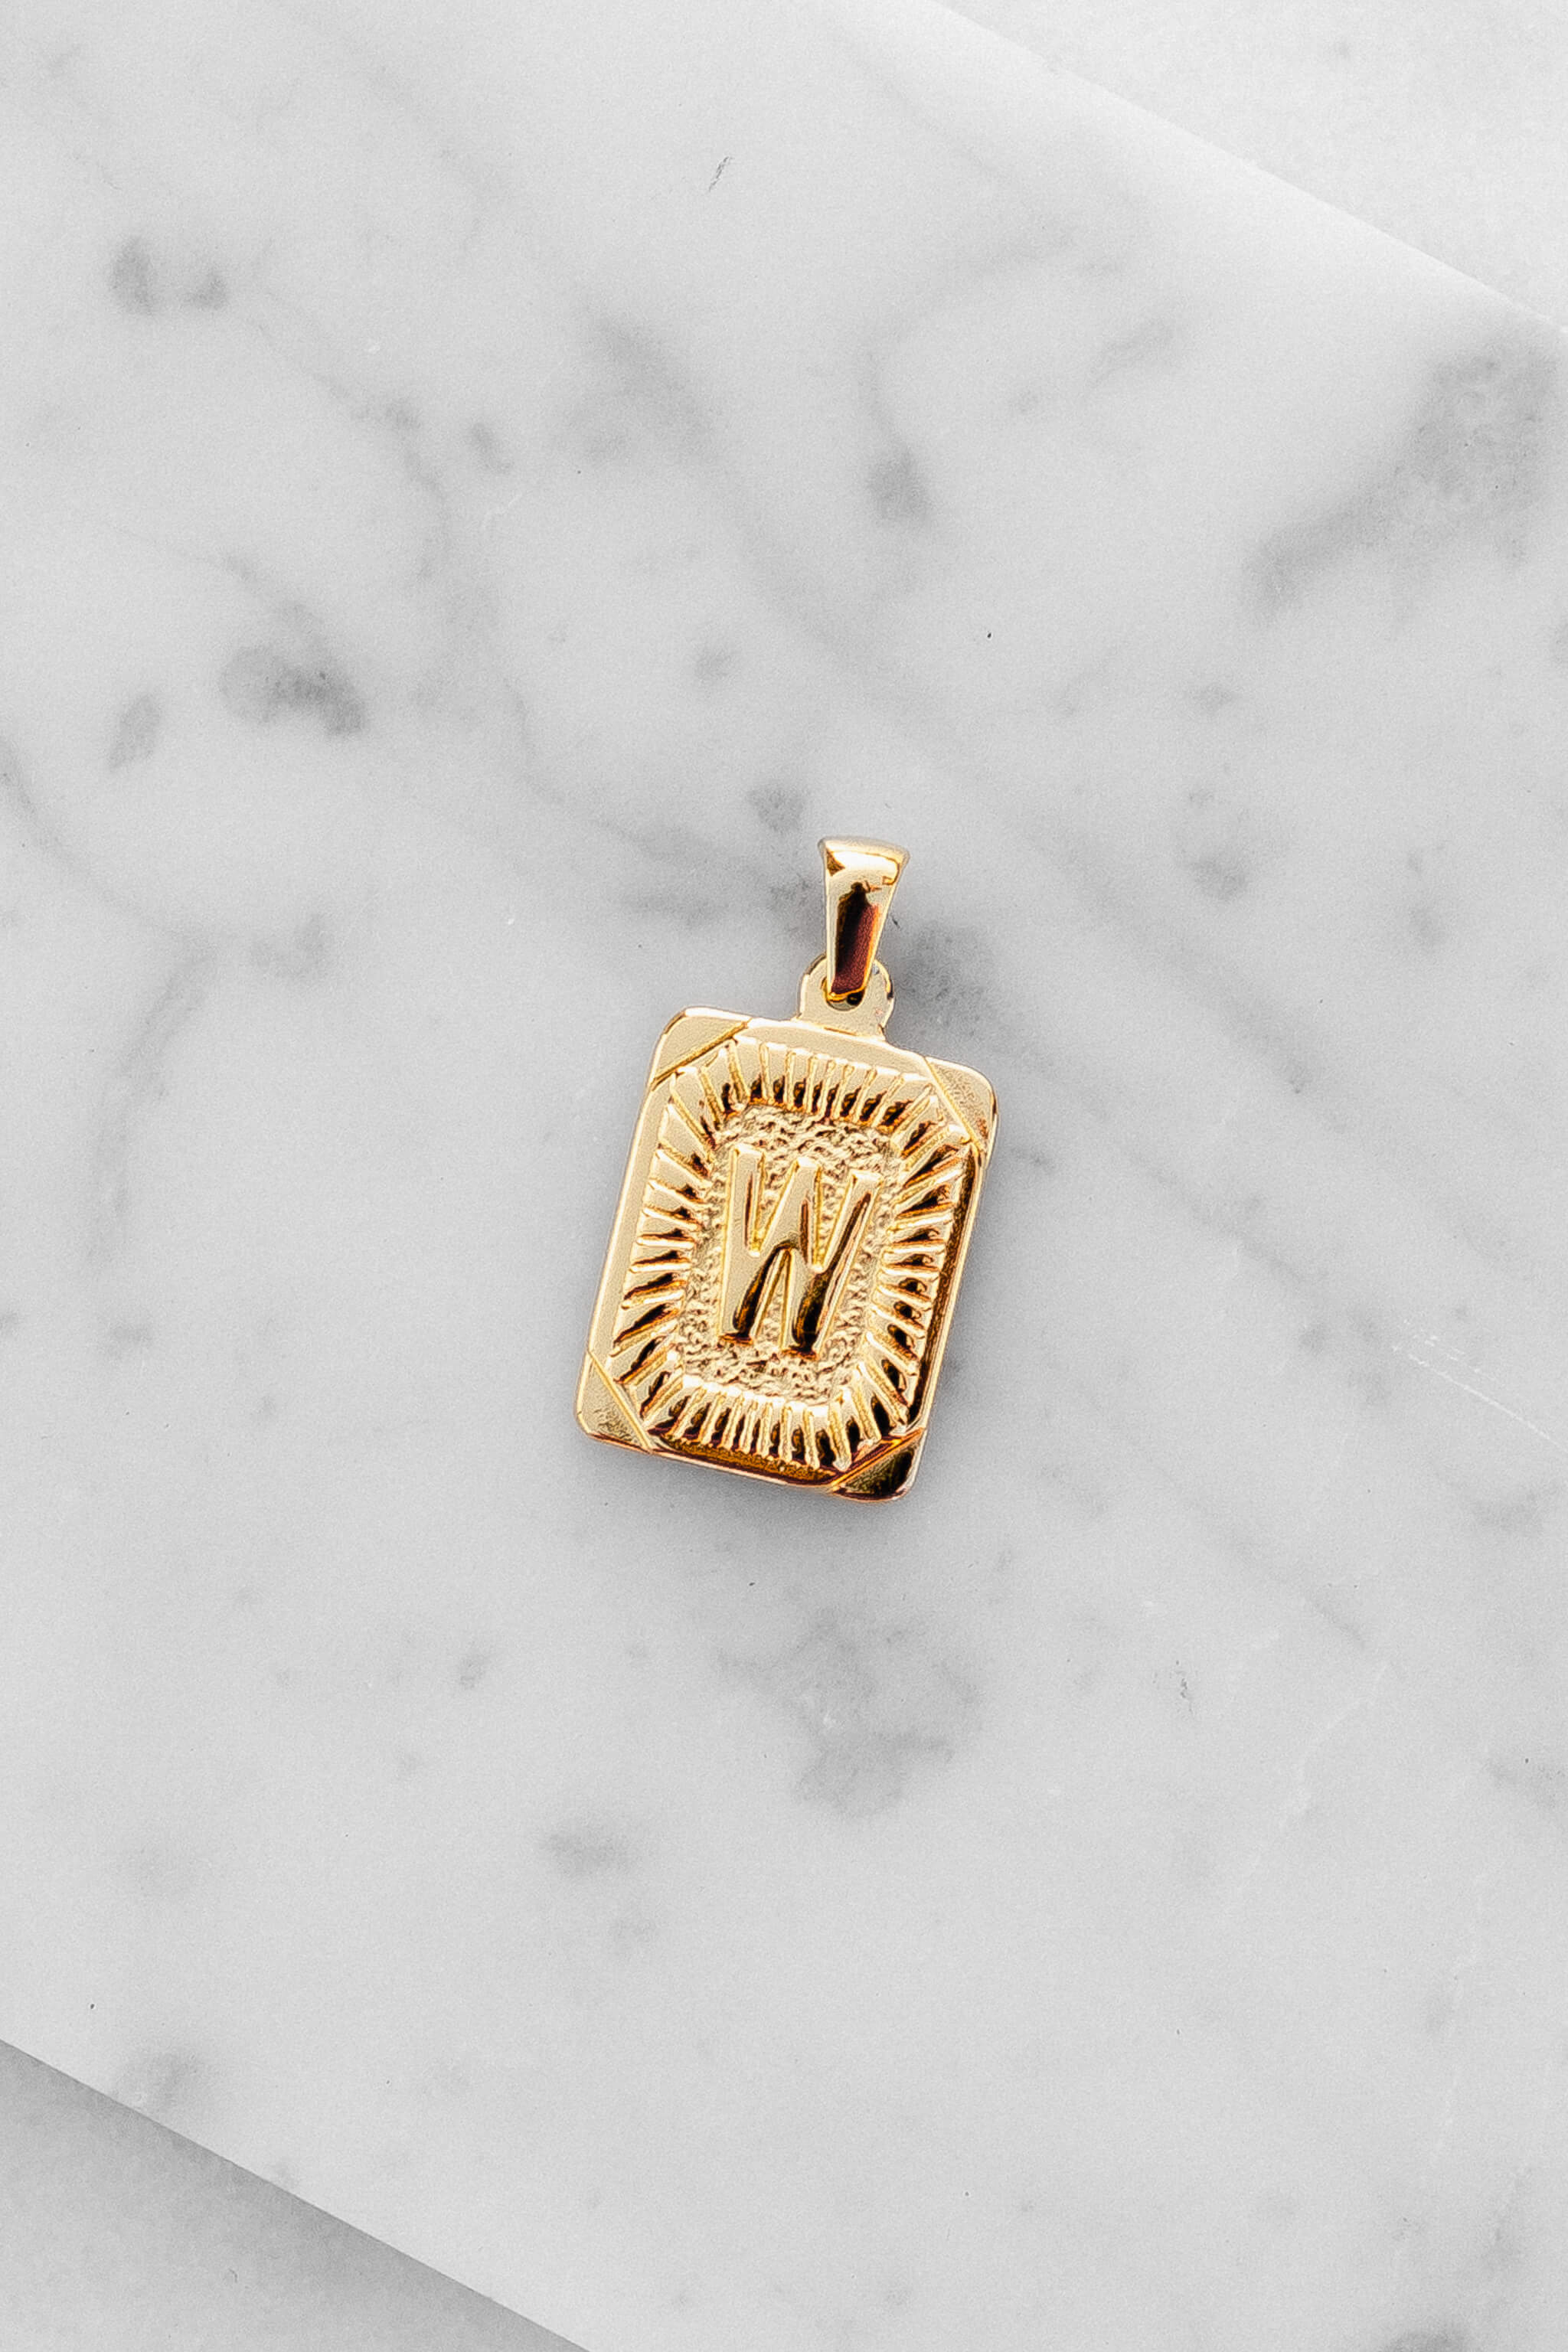 Gold Monogram Letter "W" Charm laying on a marble